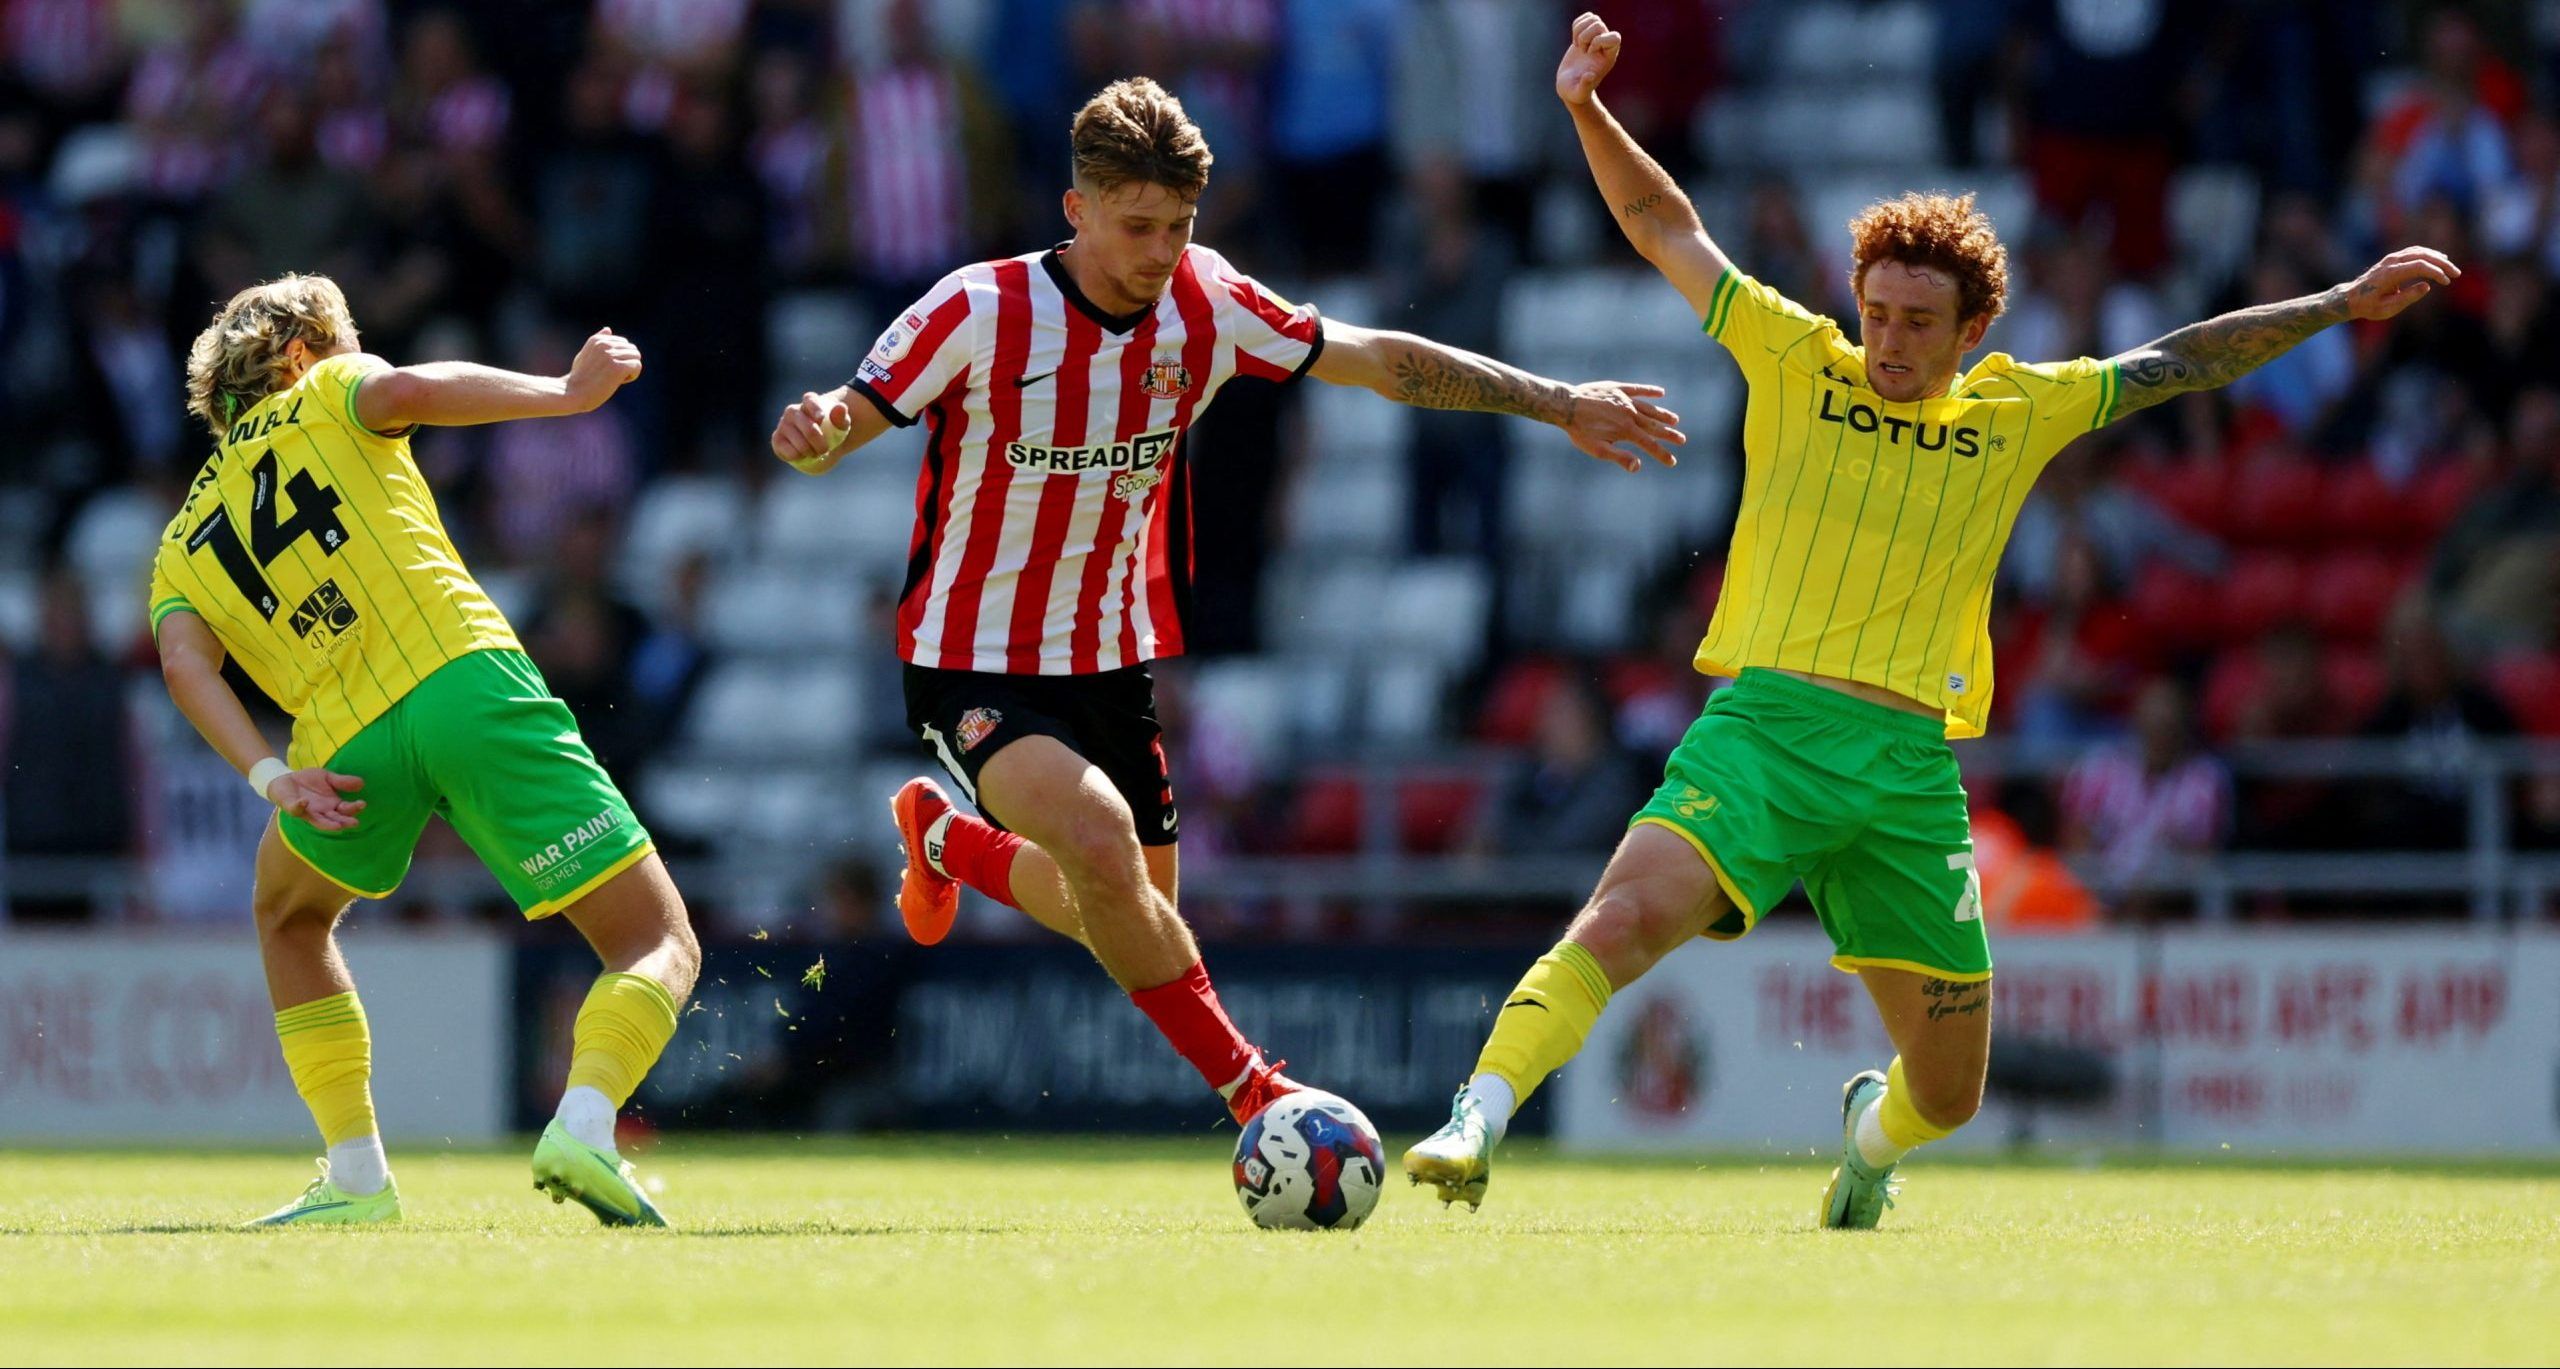 Soccer Football - Championship - Sunderland v Norwich City - Stadium of Light, Sunderland, Britain - August 27, 2022  Norwich City's Todd Cantwell and Joshua Sargent in action with Sunderland?s Dennis Cirkin  Action Images/Lee Smith  EDITORIAL USE ONLY. No use with unauthorized audio, video, data, fixture lists, club/league logos or 